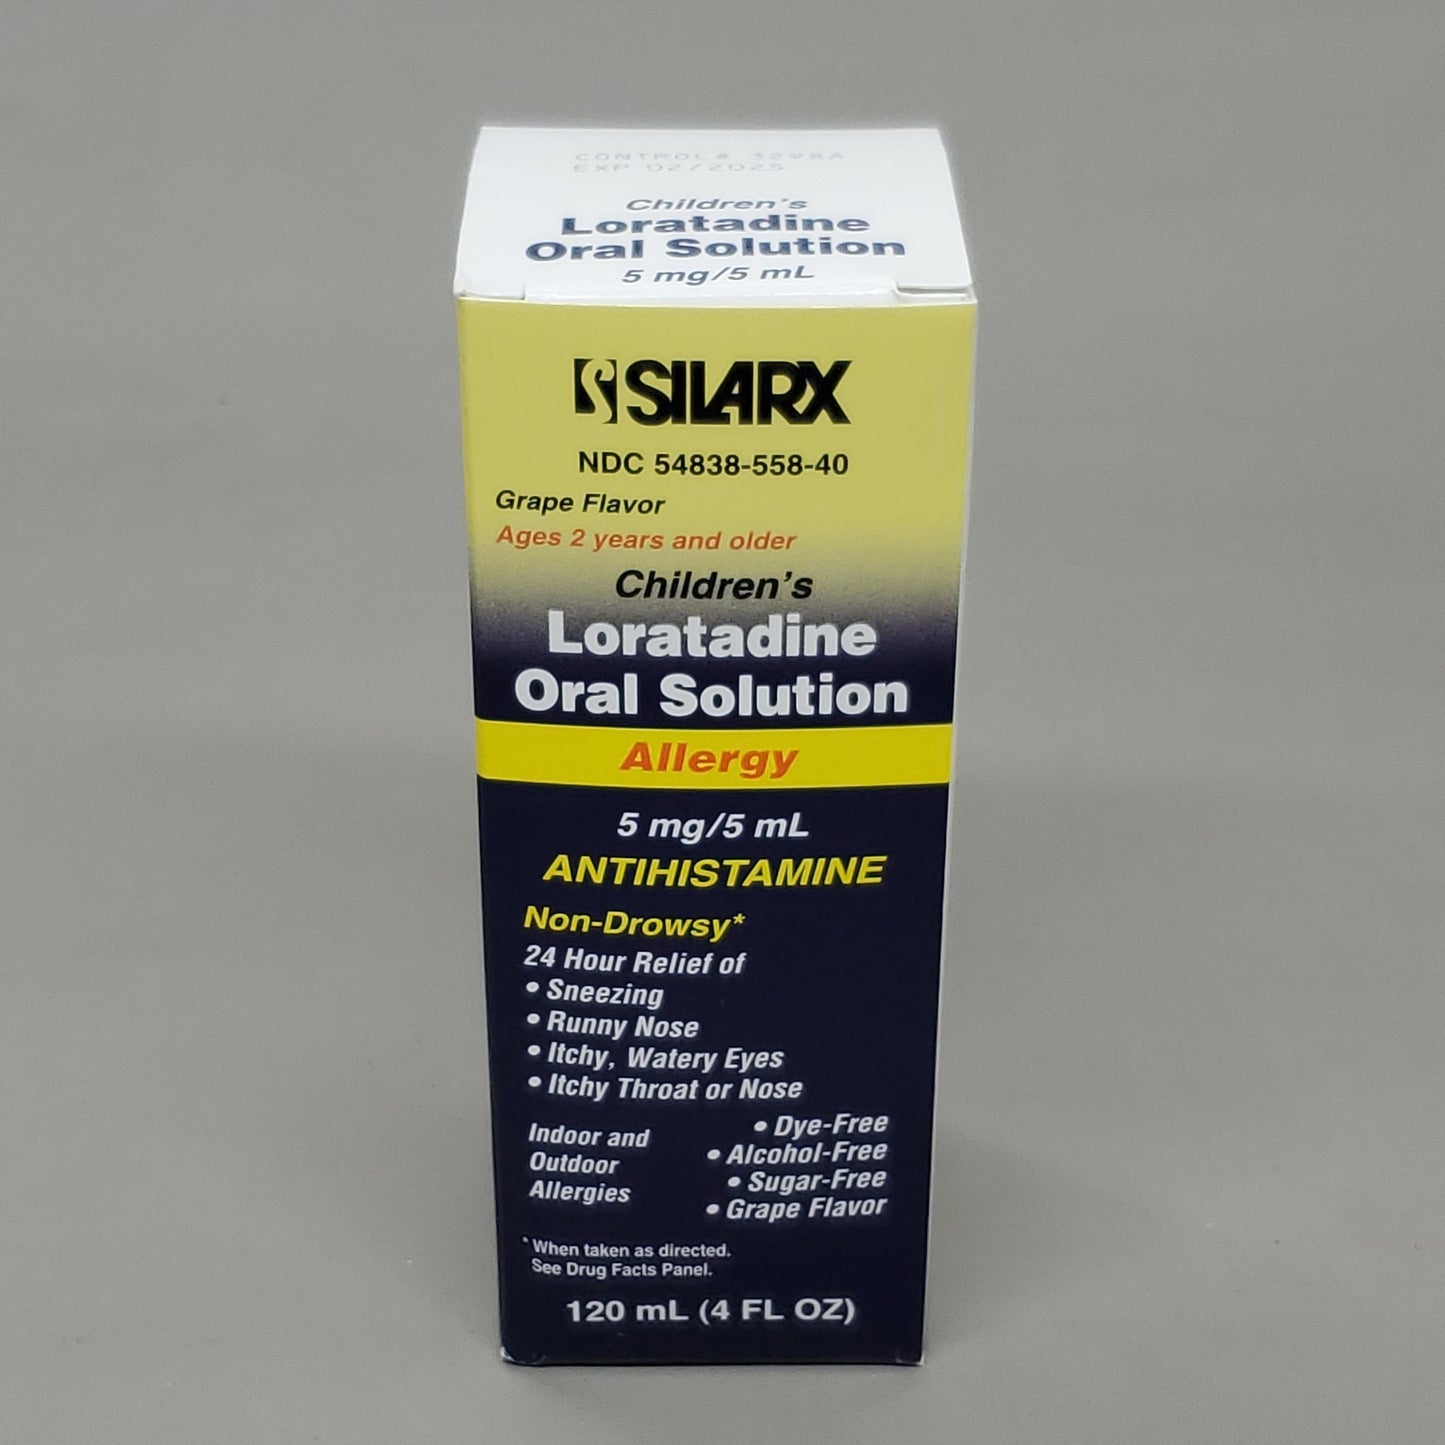 SILARX 6 Pack Of Children's Loratadine Oral Solution Non-Drowsy 24HR Allergy Relief 02/25